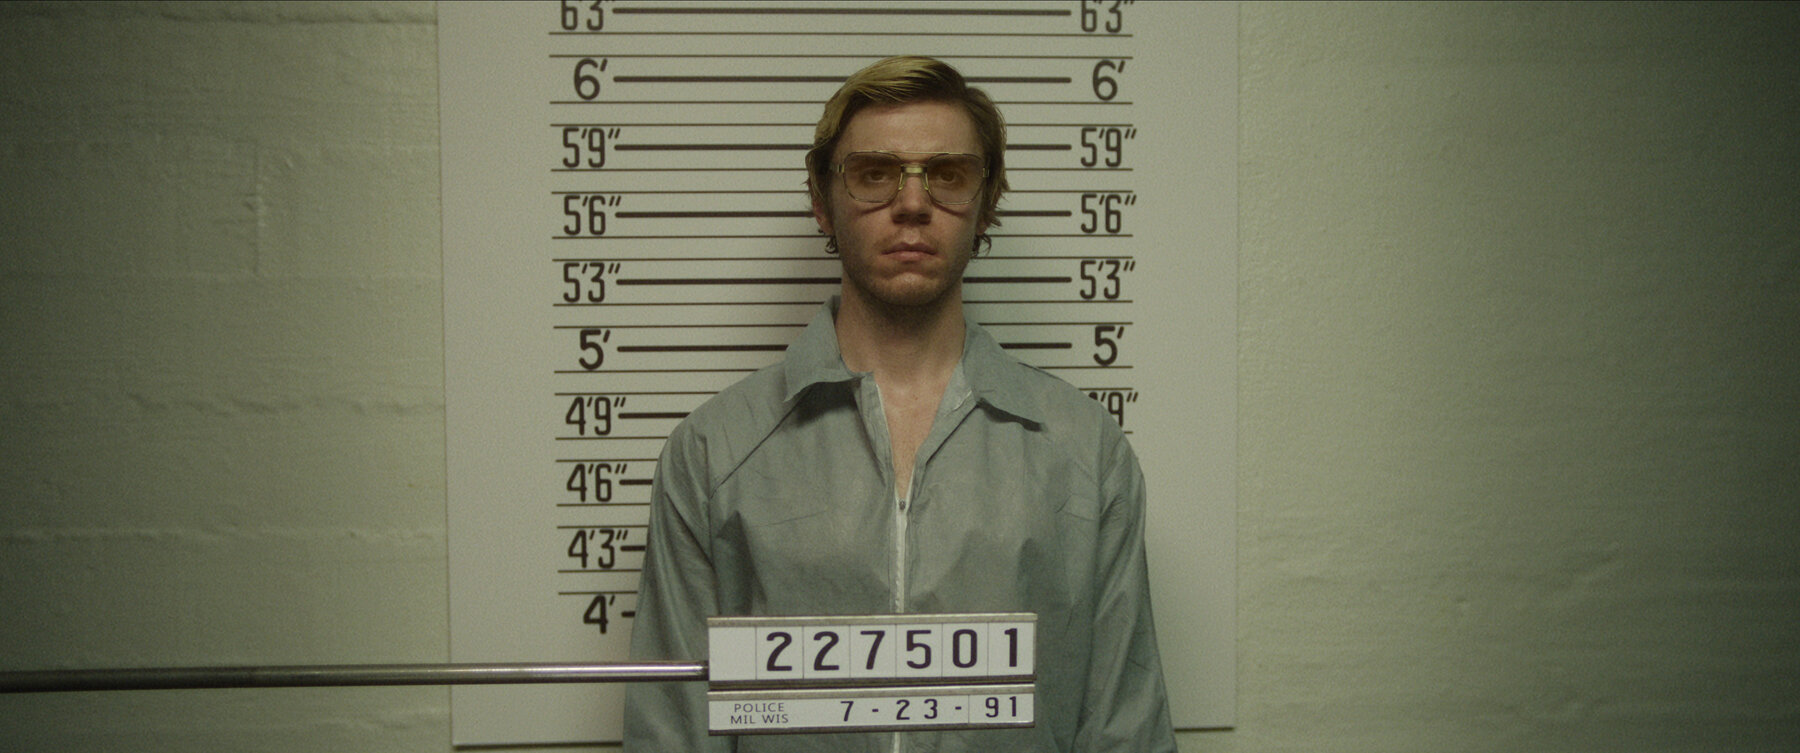 This change was made by Netflix after huge backlash against Dahmer.